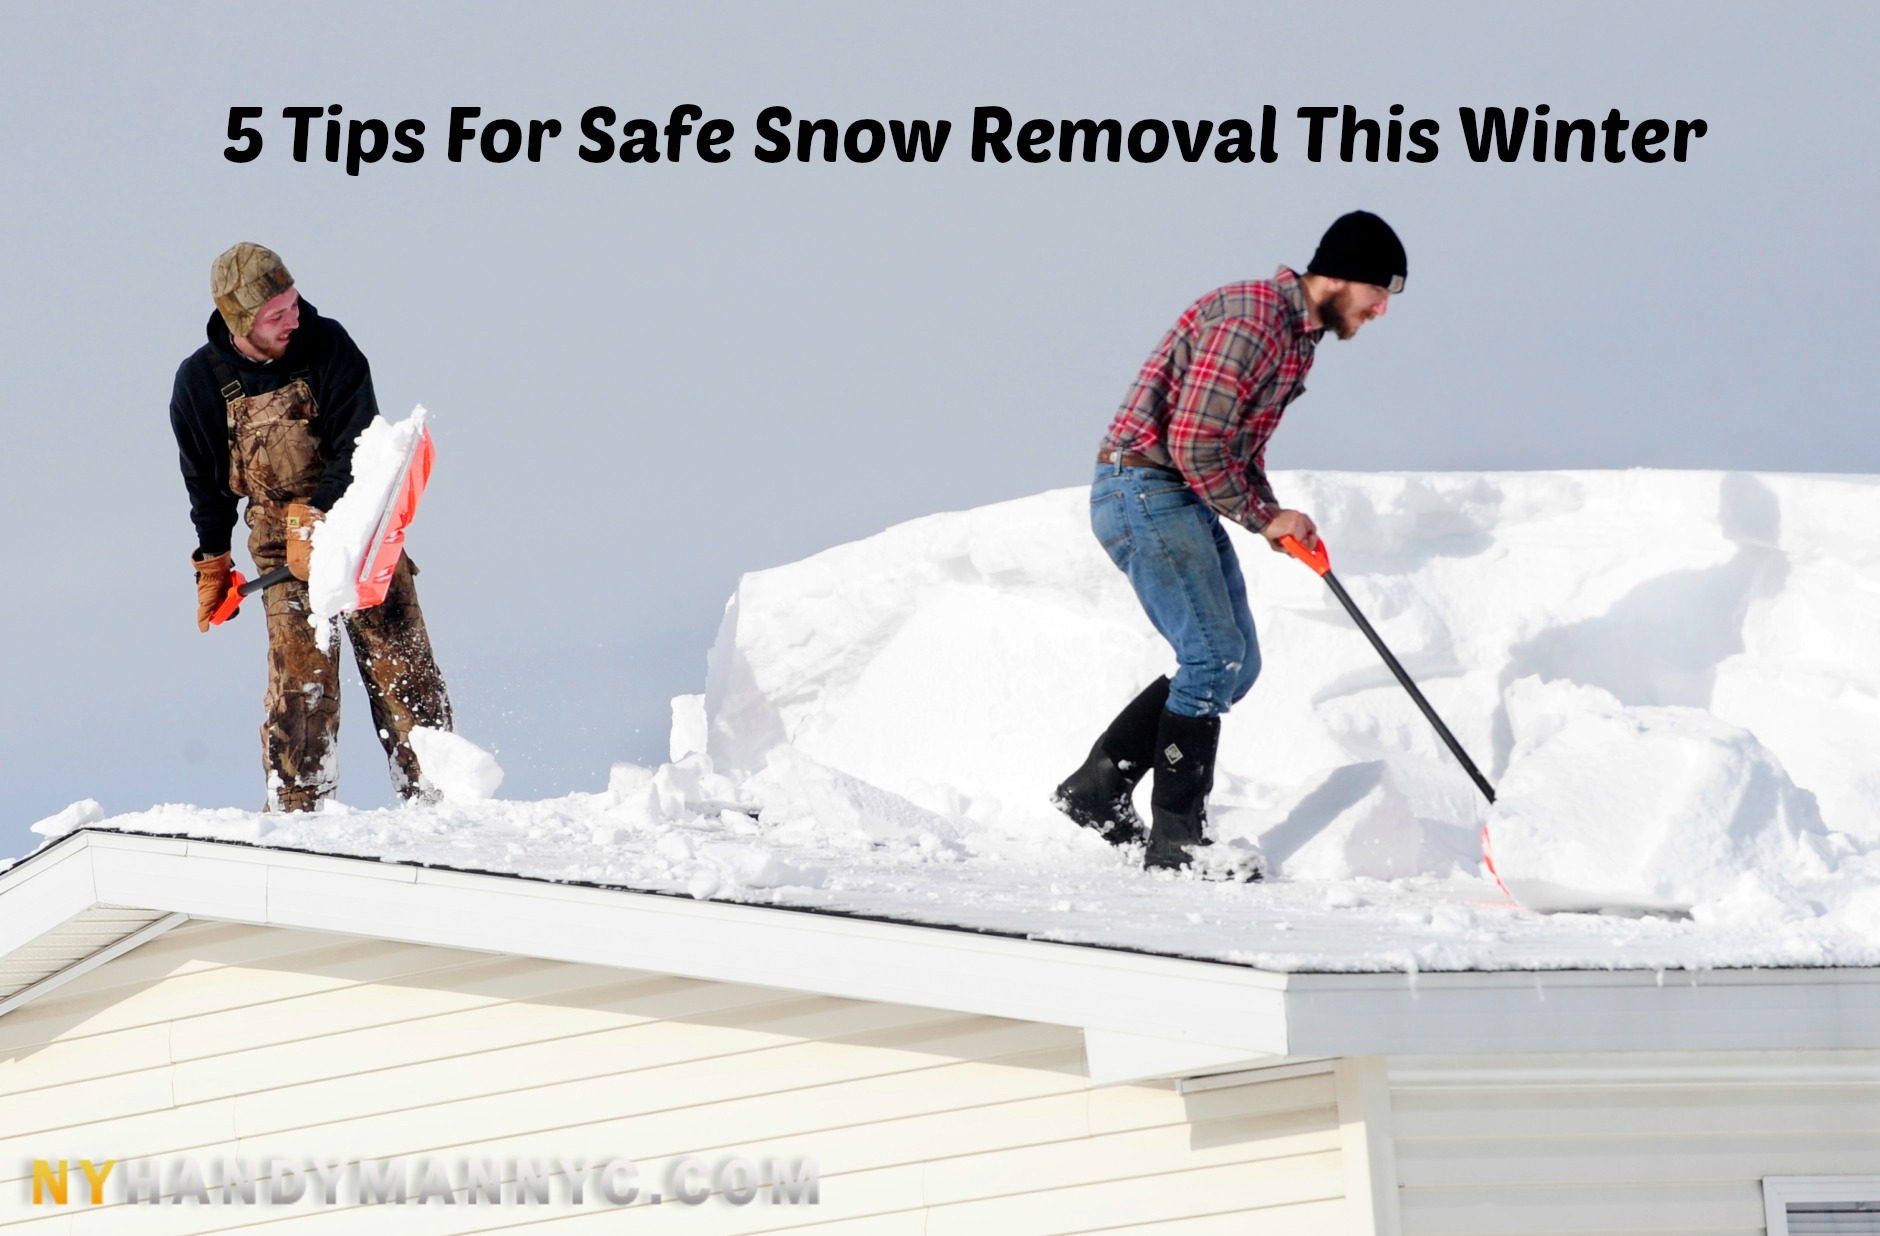 5 Tips For Safe Snow Removal This Winter